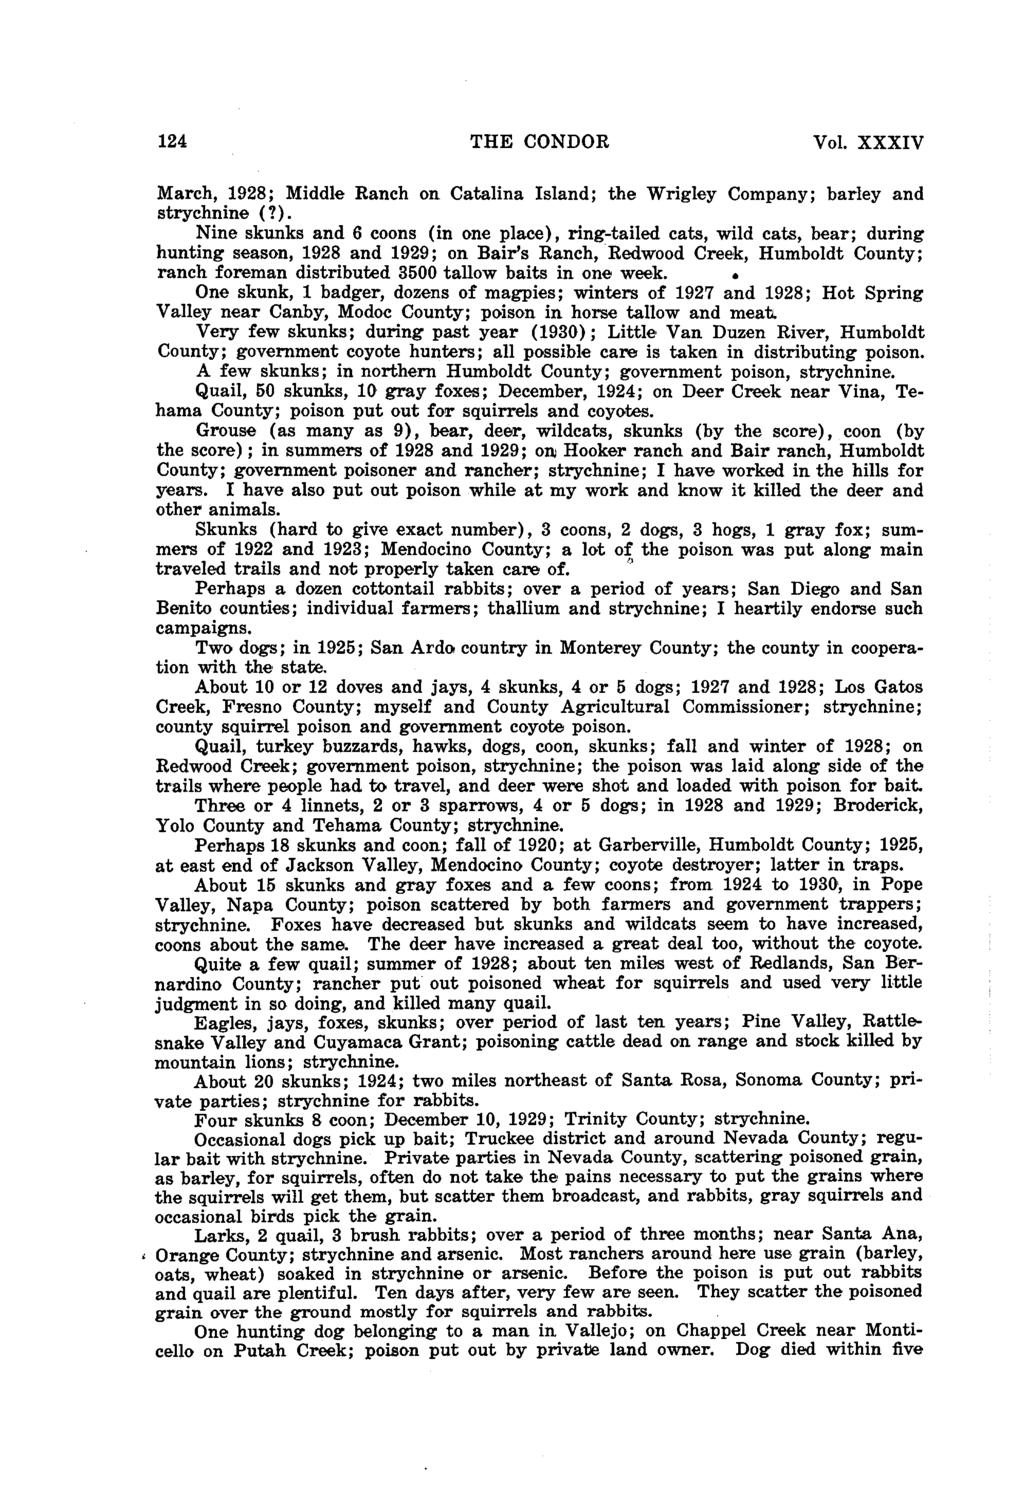 124 THE CONDOR Vol. XXXIV March, 1928; Middle Ranch on Catalina Island; the Wrigley Company; barley and strychnine (?).